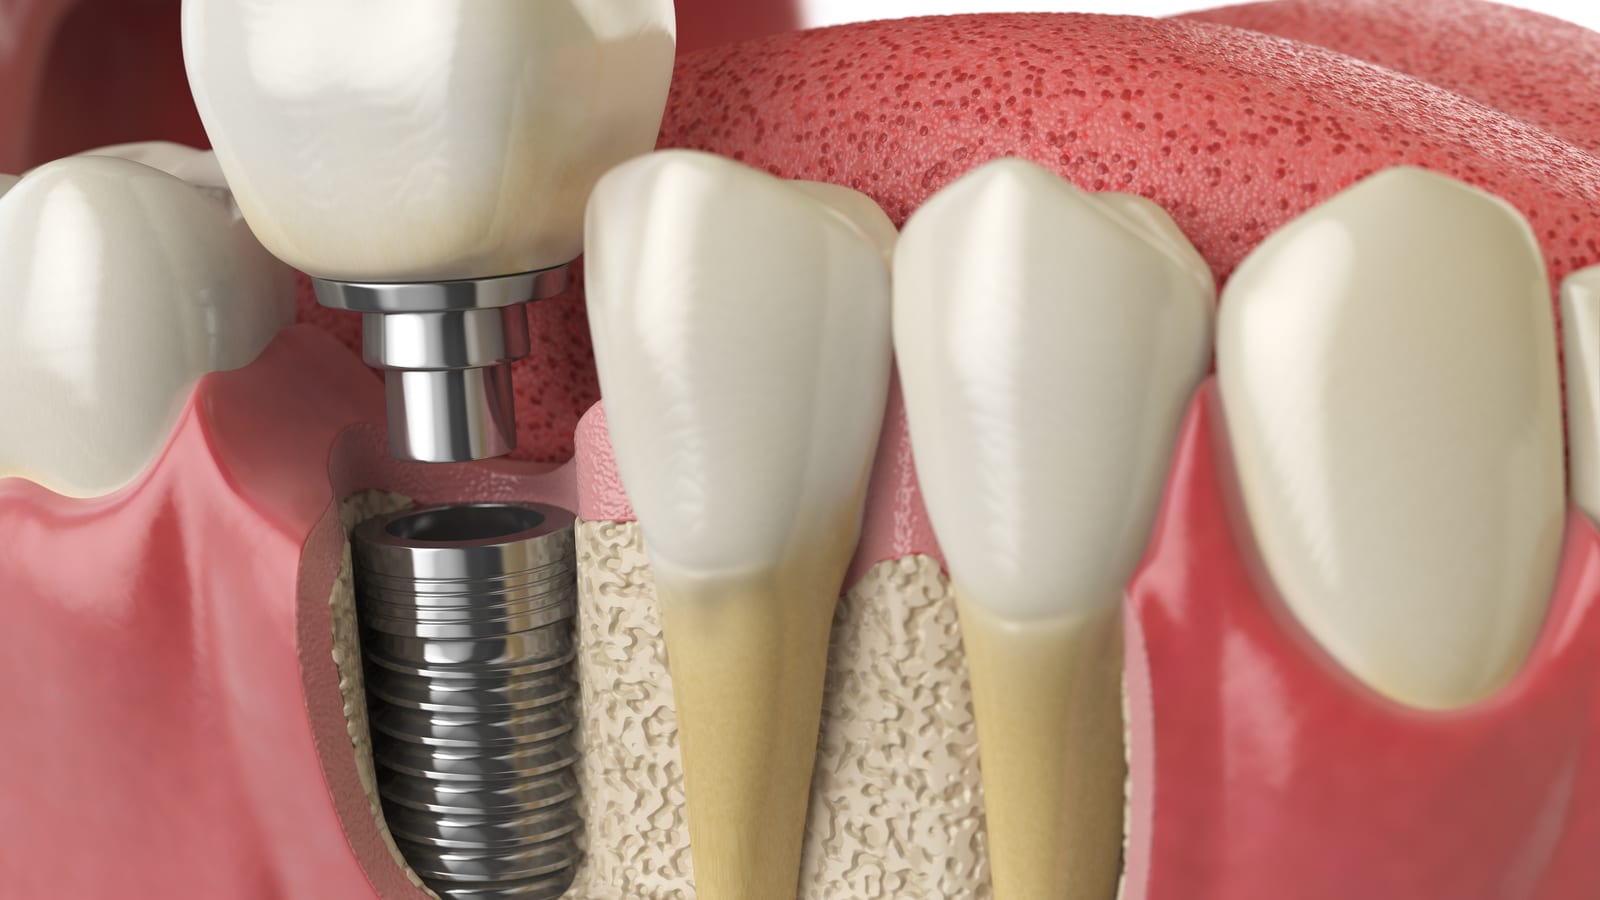 Rendering of dental implant assembly